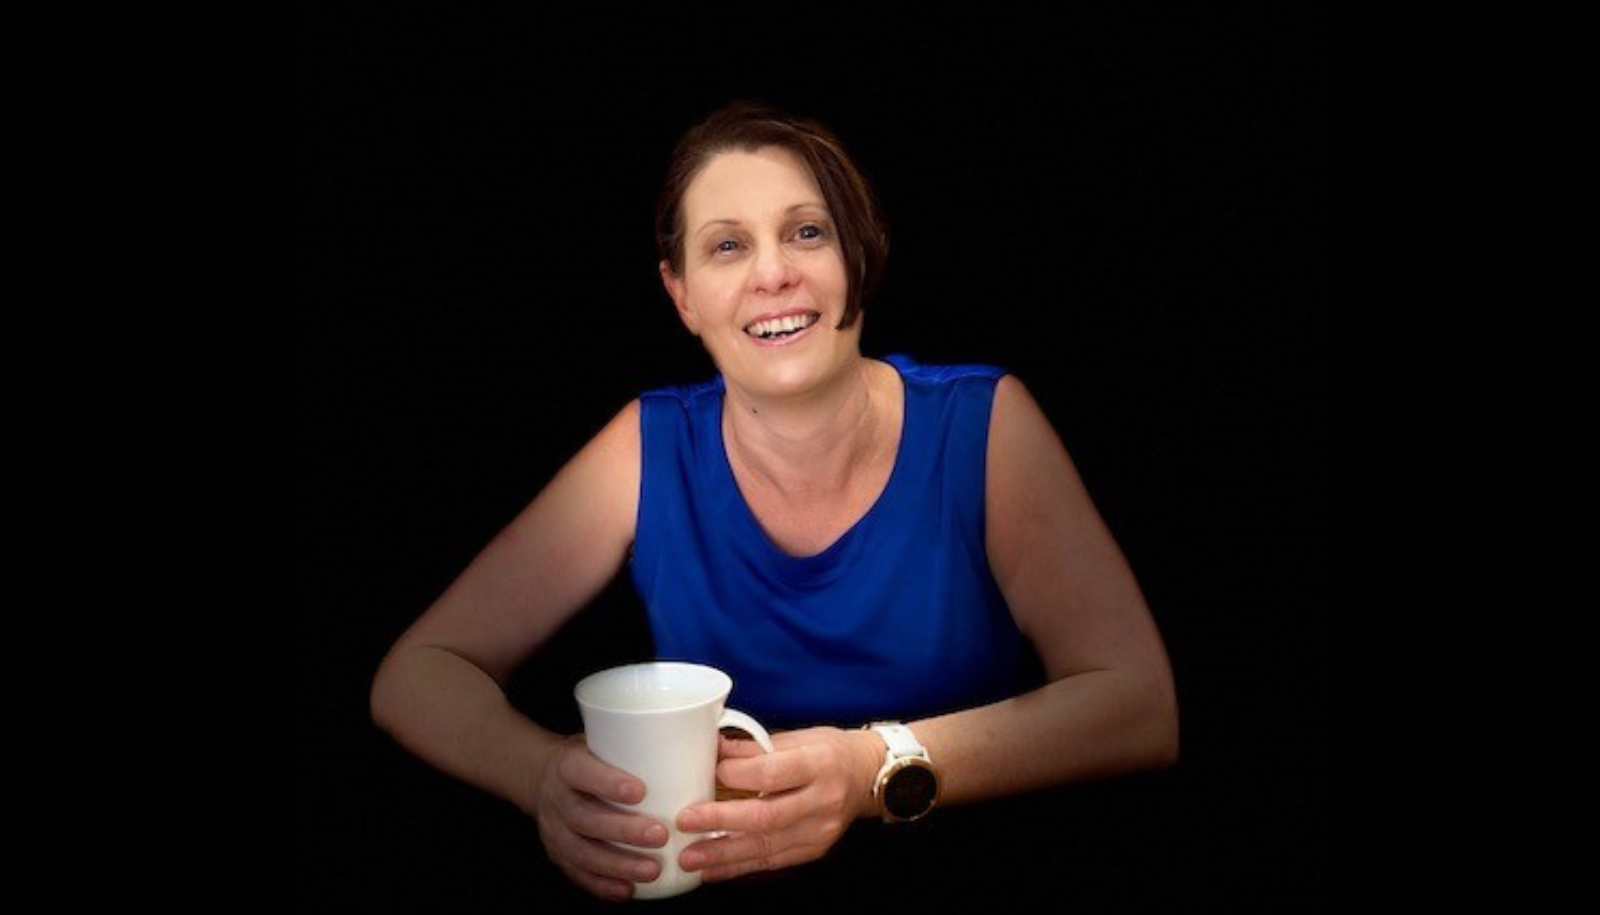 Sarnya is sitting while smiling to camera, wearing a blue top and holding a white mug.